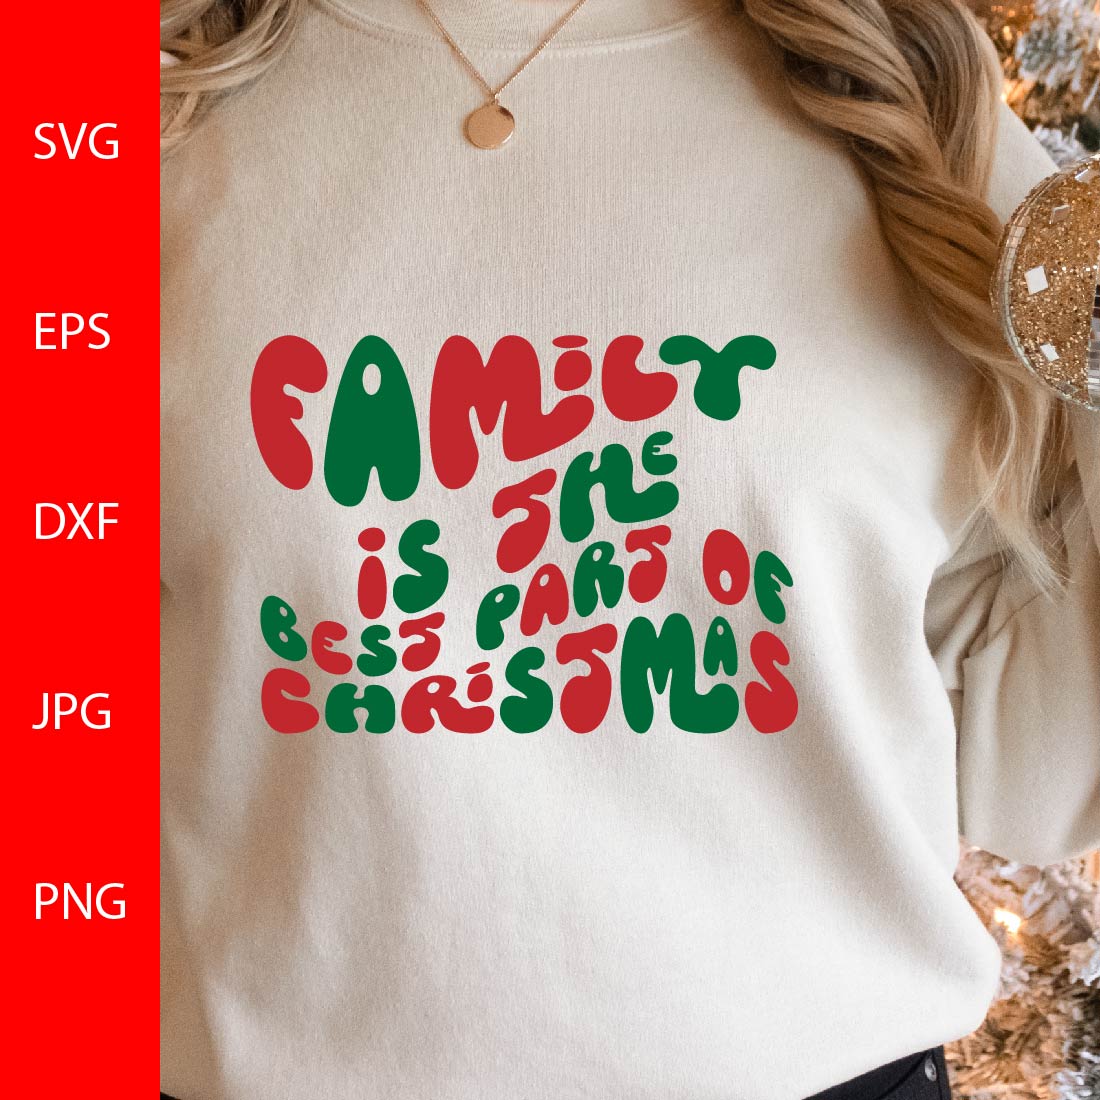 Family Is The Best Part Of Christmas SVG created by Sintegra.